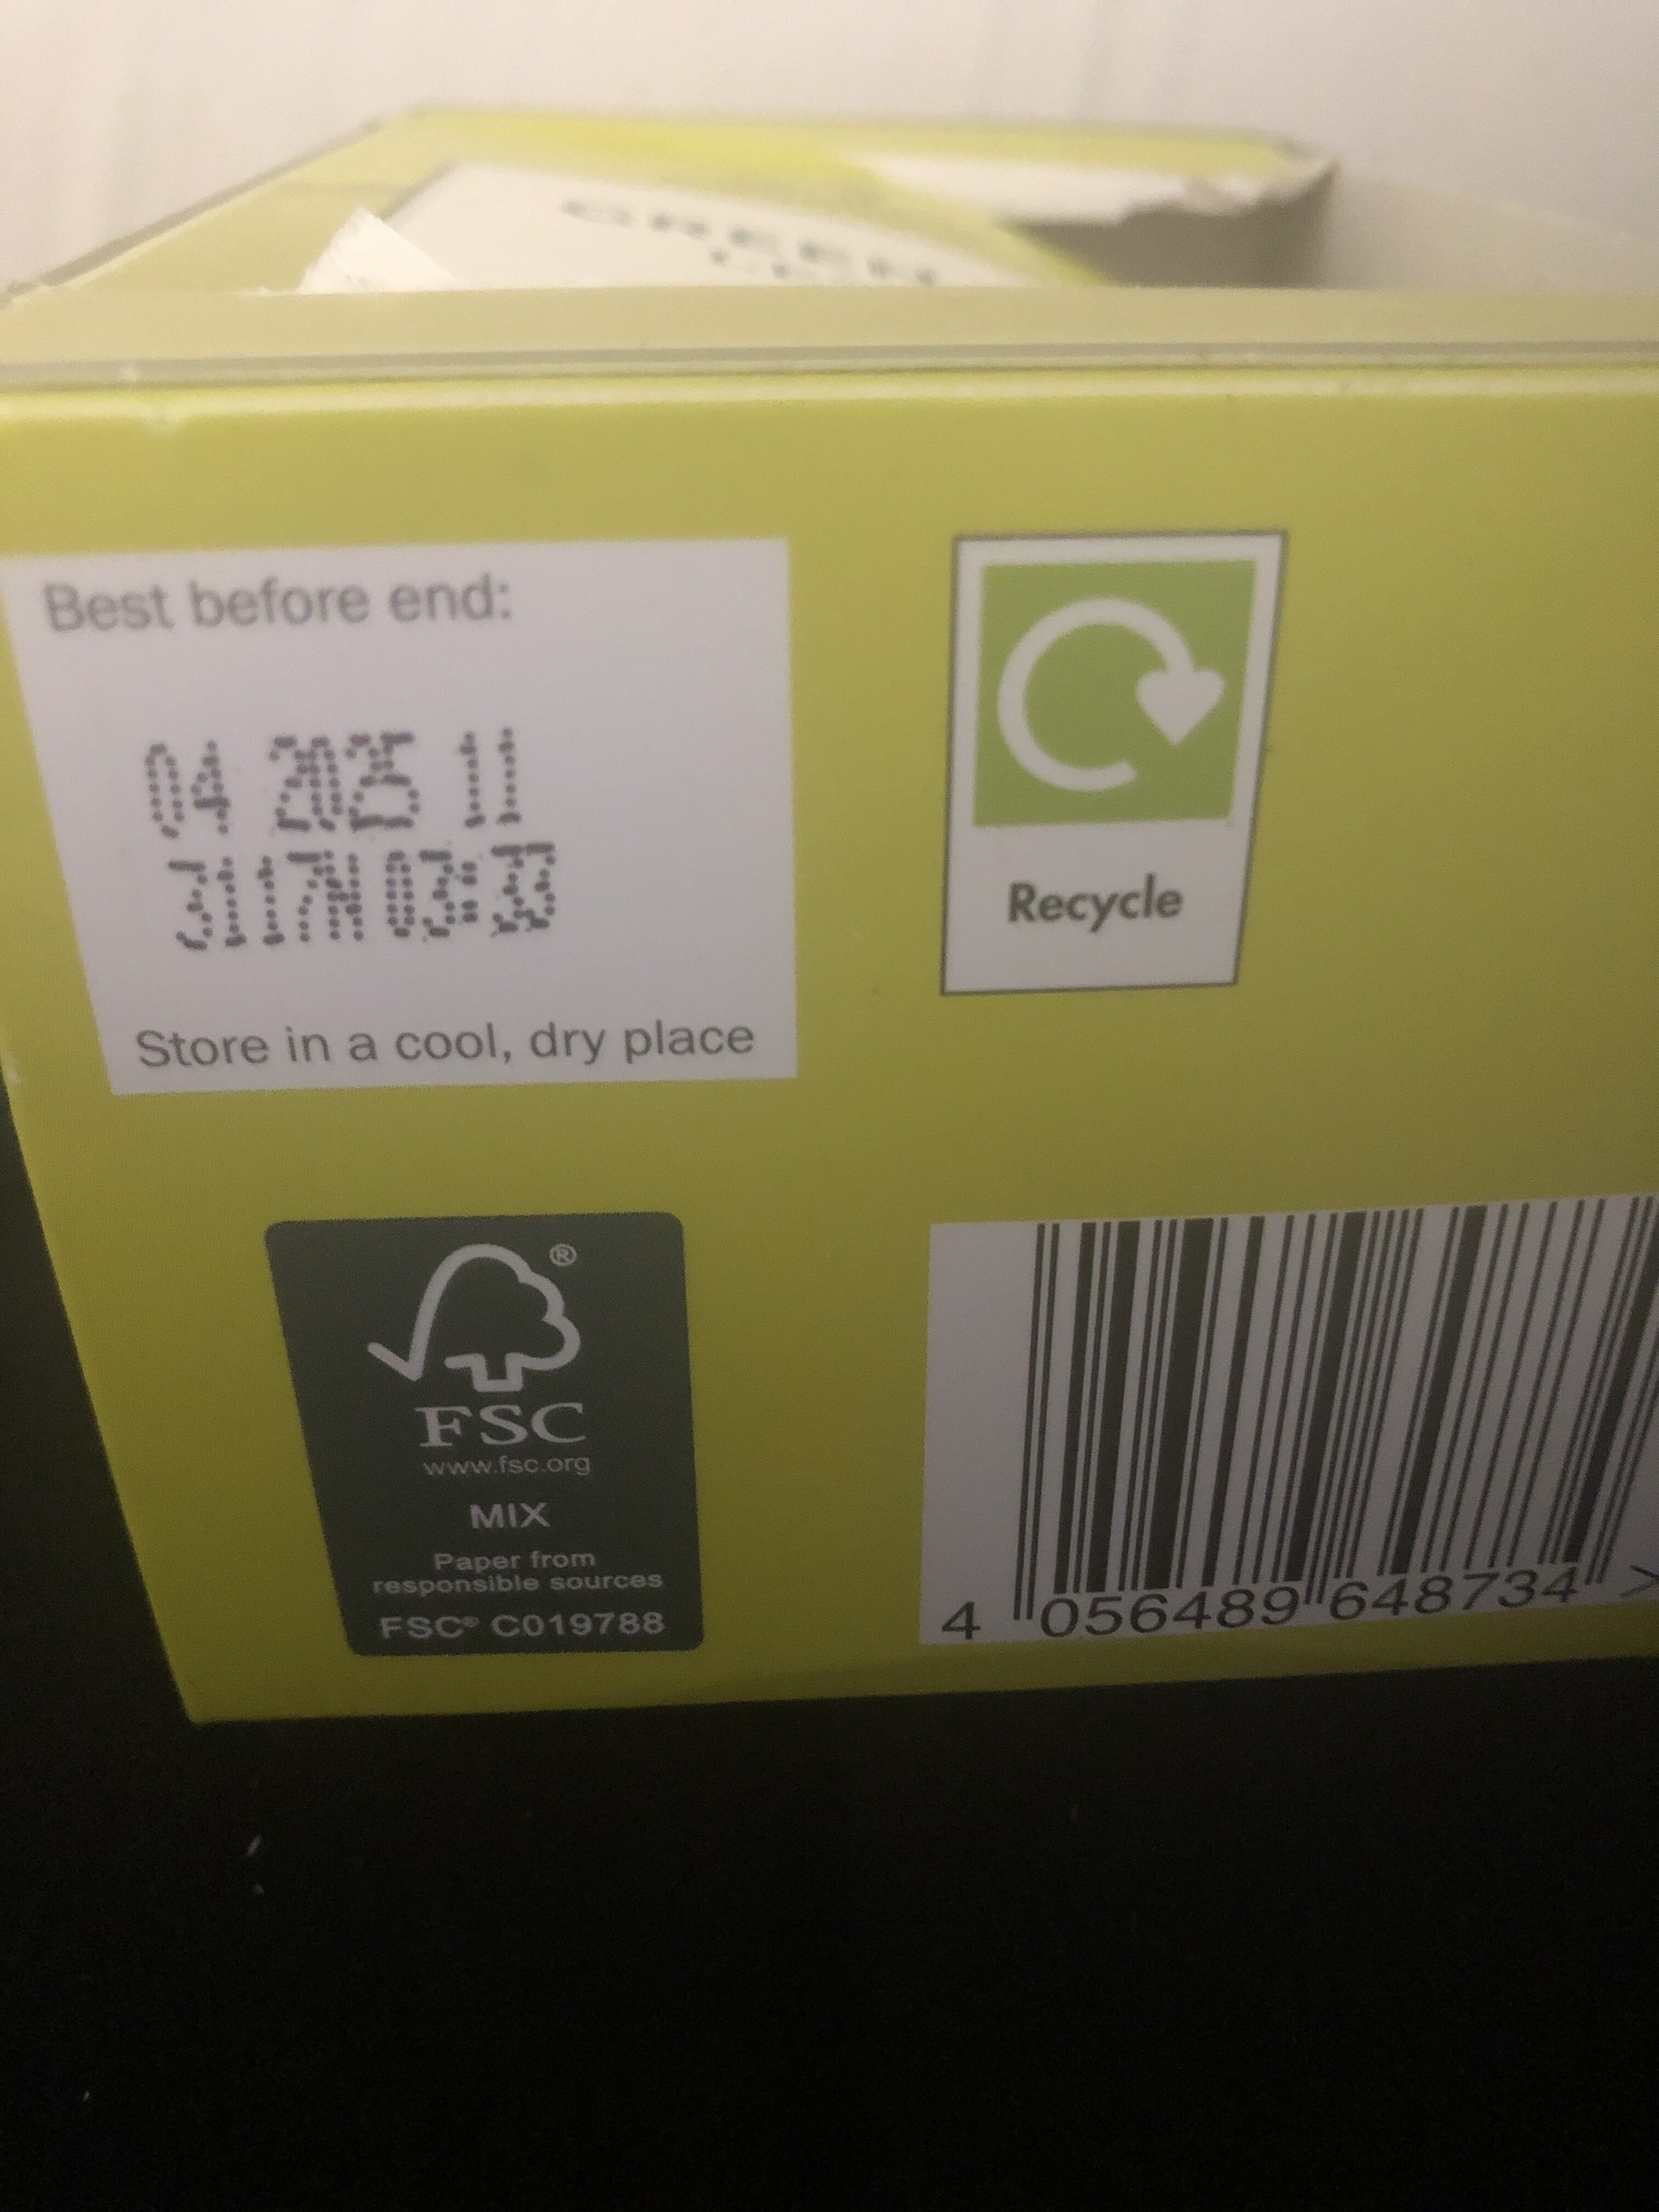 Green Tea Lemon - Recycling instructions and/or packaging information